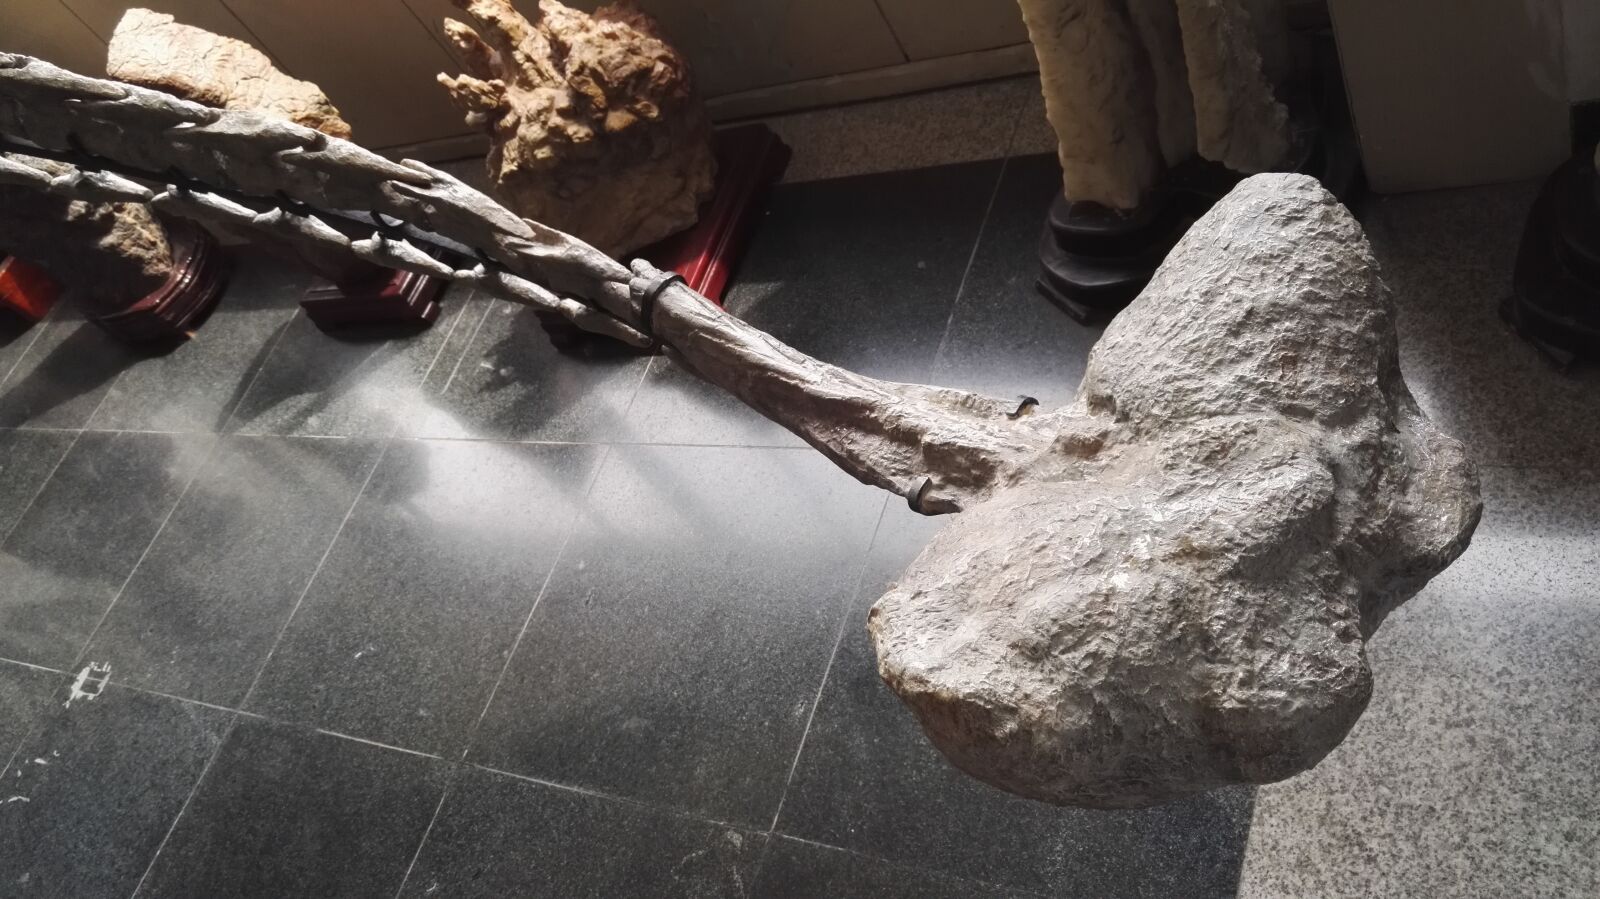 HUAWEI Honor 7 sample photo. Dinosaur, fossil, weapons photography